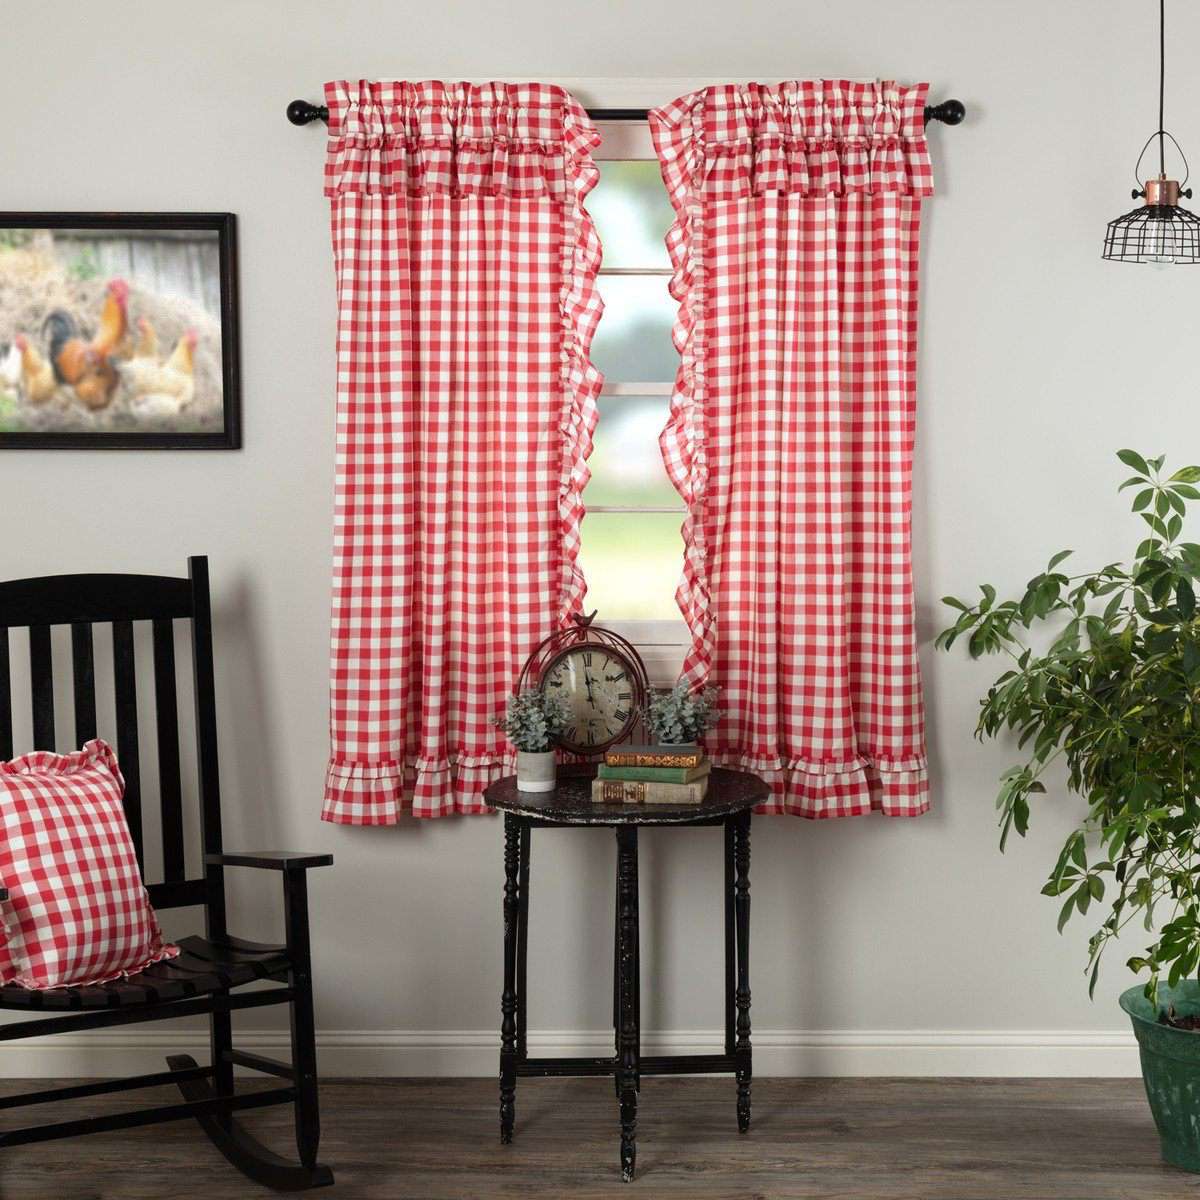 Annie Buffalo Red Check Ruffled Short Panel Curtain Set of 2 63"x36" VHC Brands - The Fox Decor